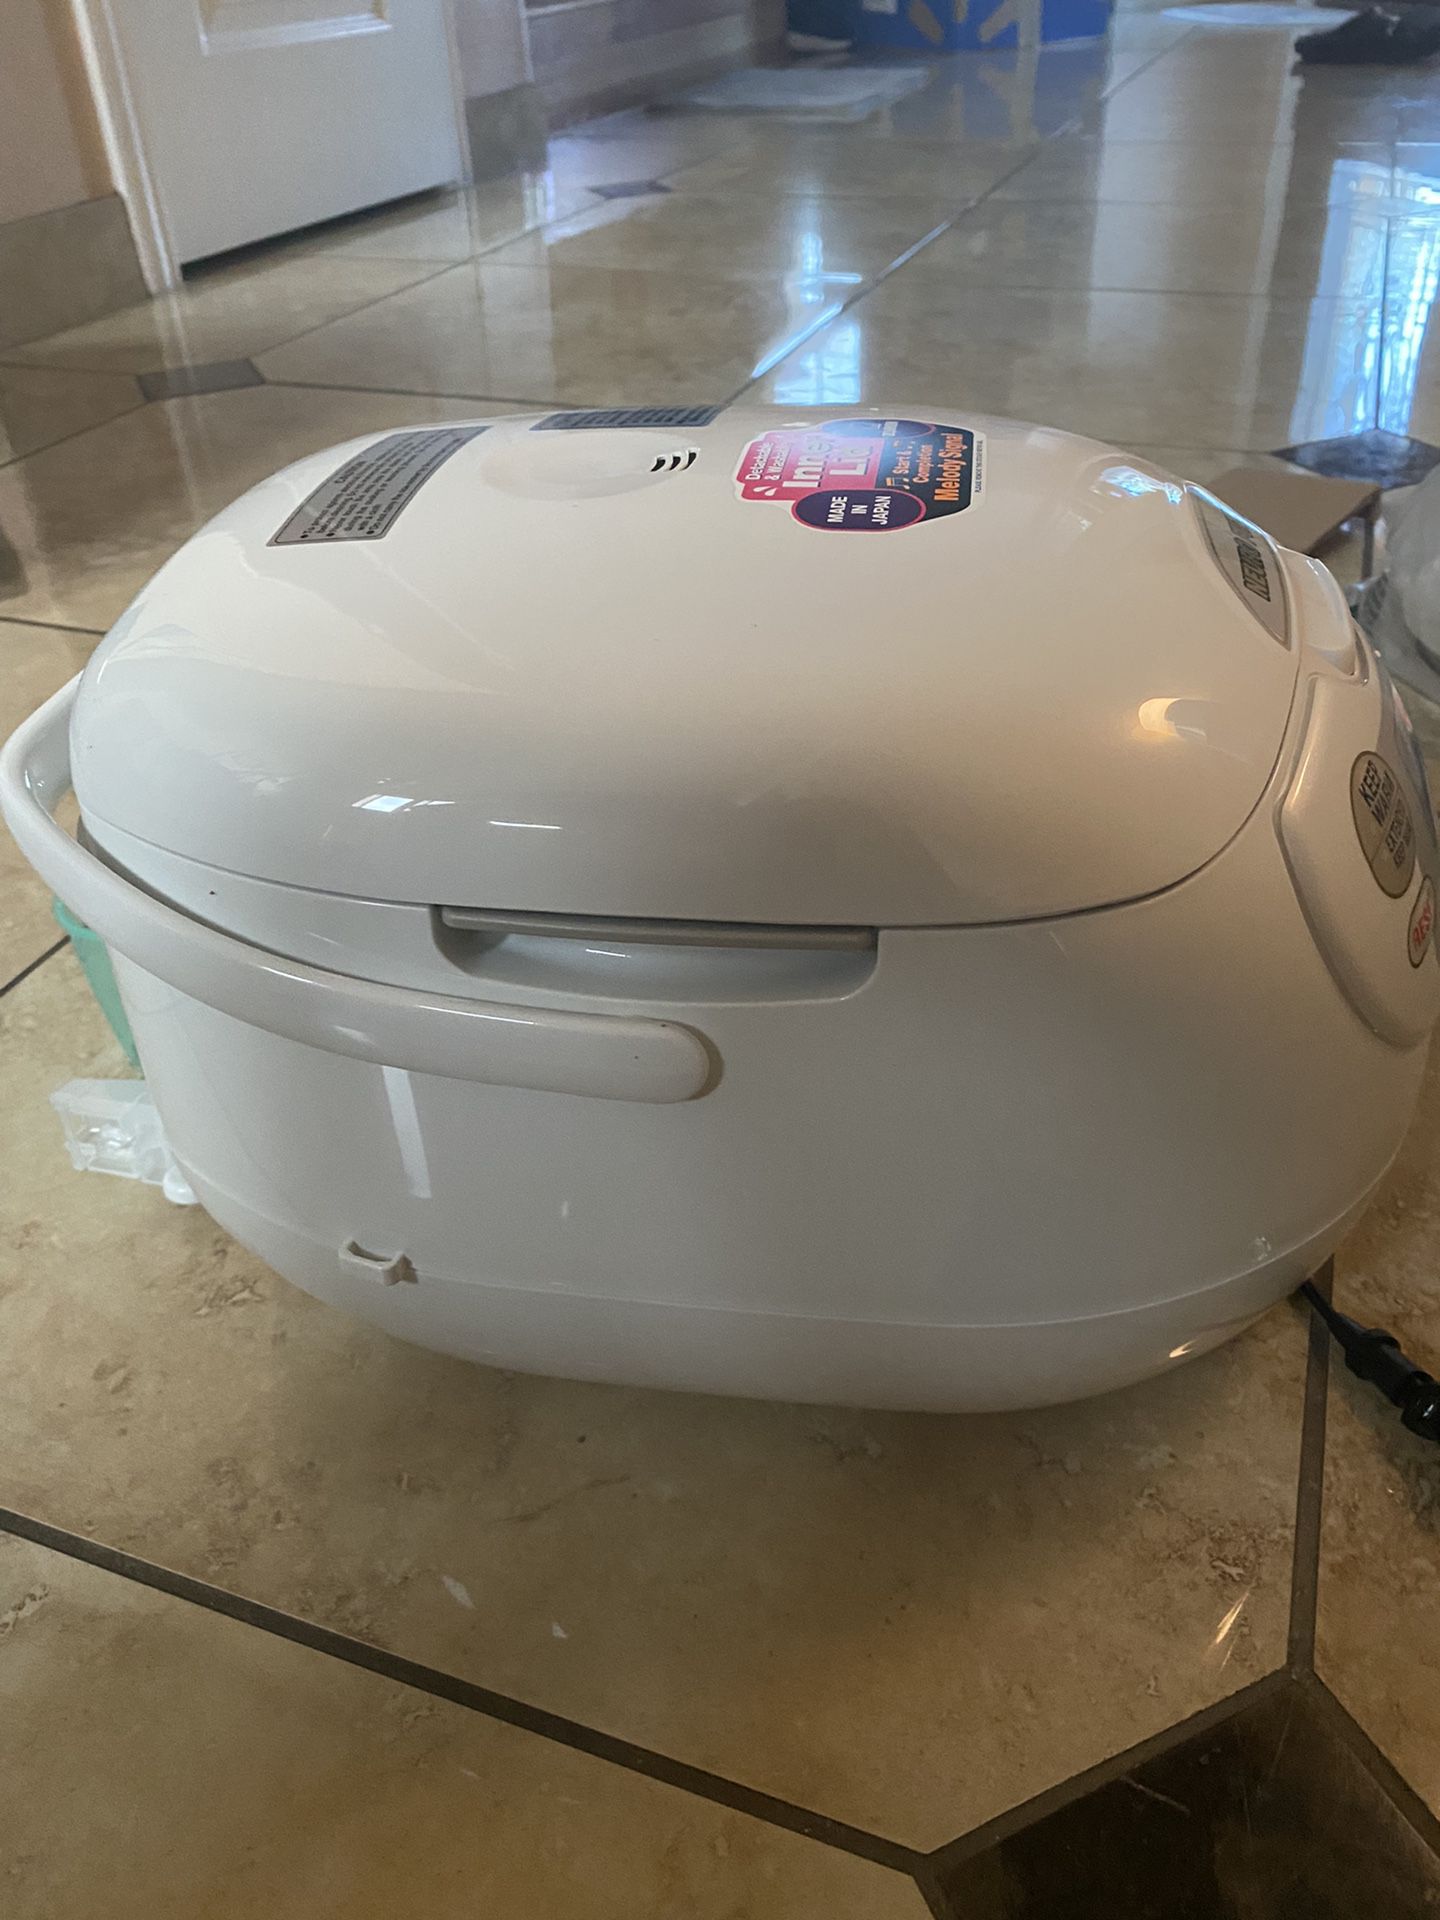 Zojirushi NS-ZCC18 Neuro Fuzzy Rice Cooker & Warmer, 10 Cup, Premium White,  Made in Japan for Sale in Philadelphia, PA - OfferUp